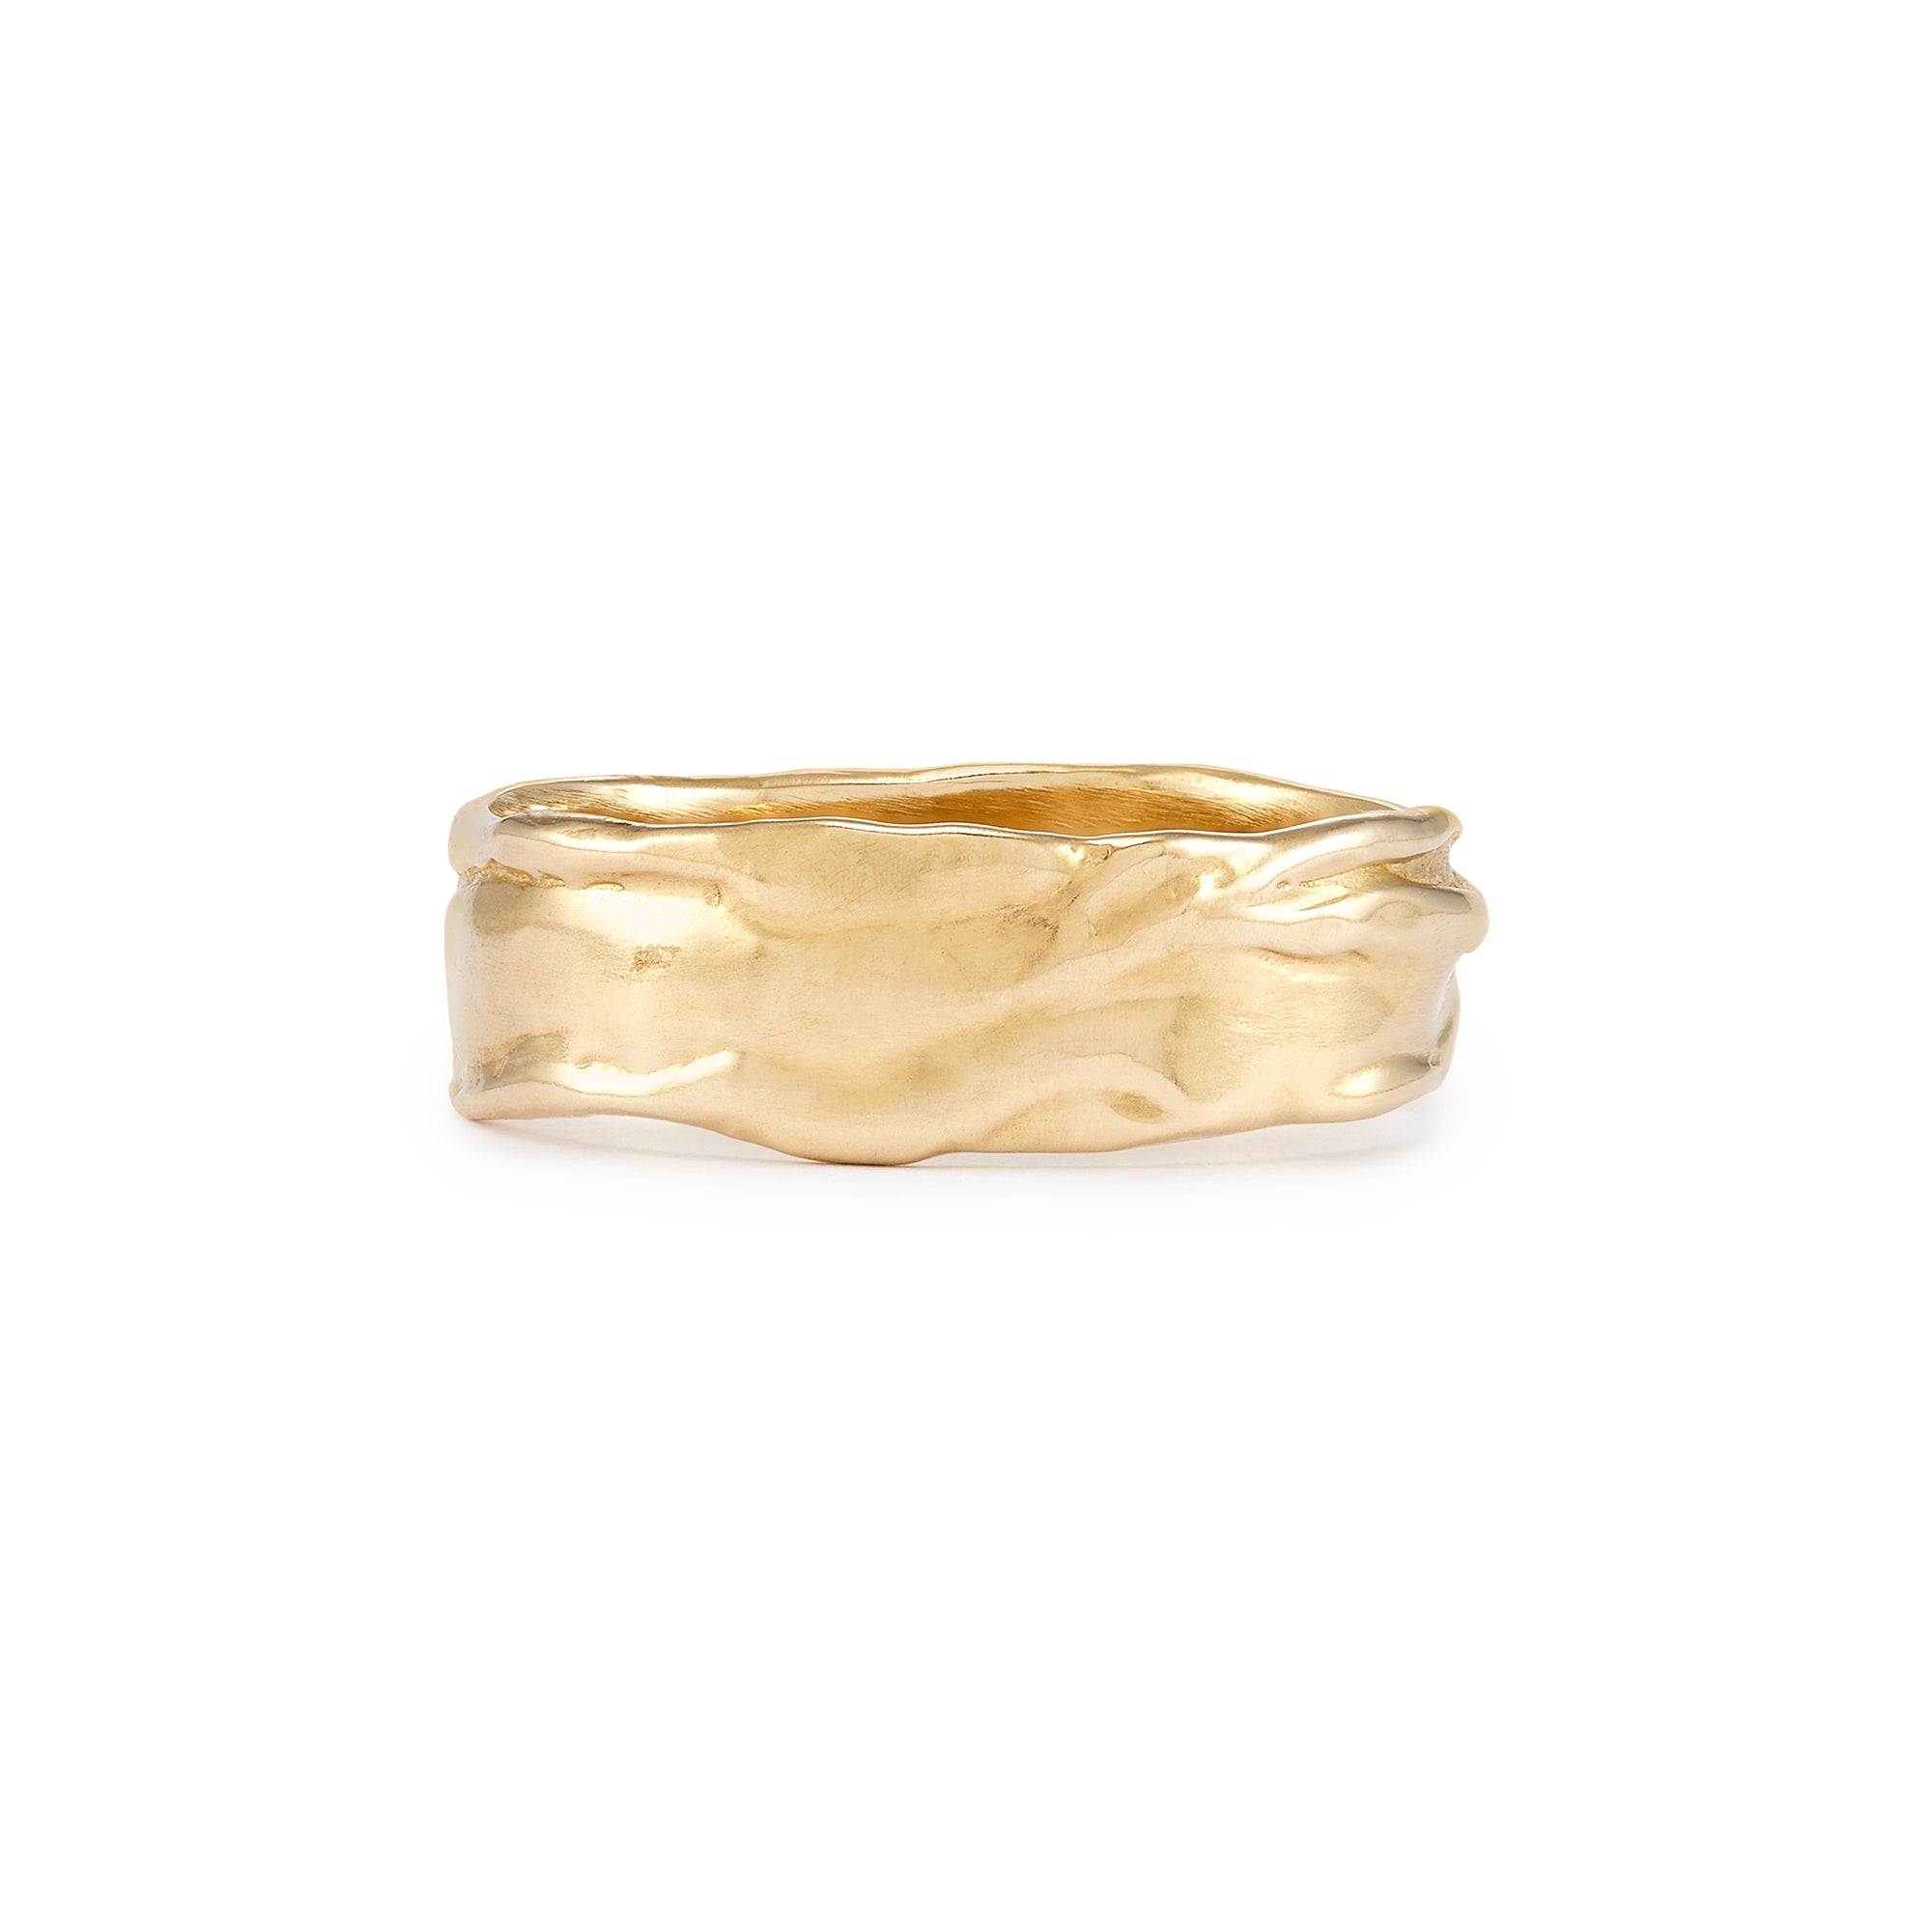 The striking Drift Band is a beautifully textured modern ring in 14k yellow gold creating a lightweight and organic band.